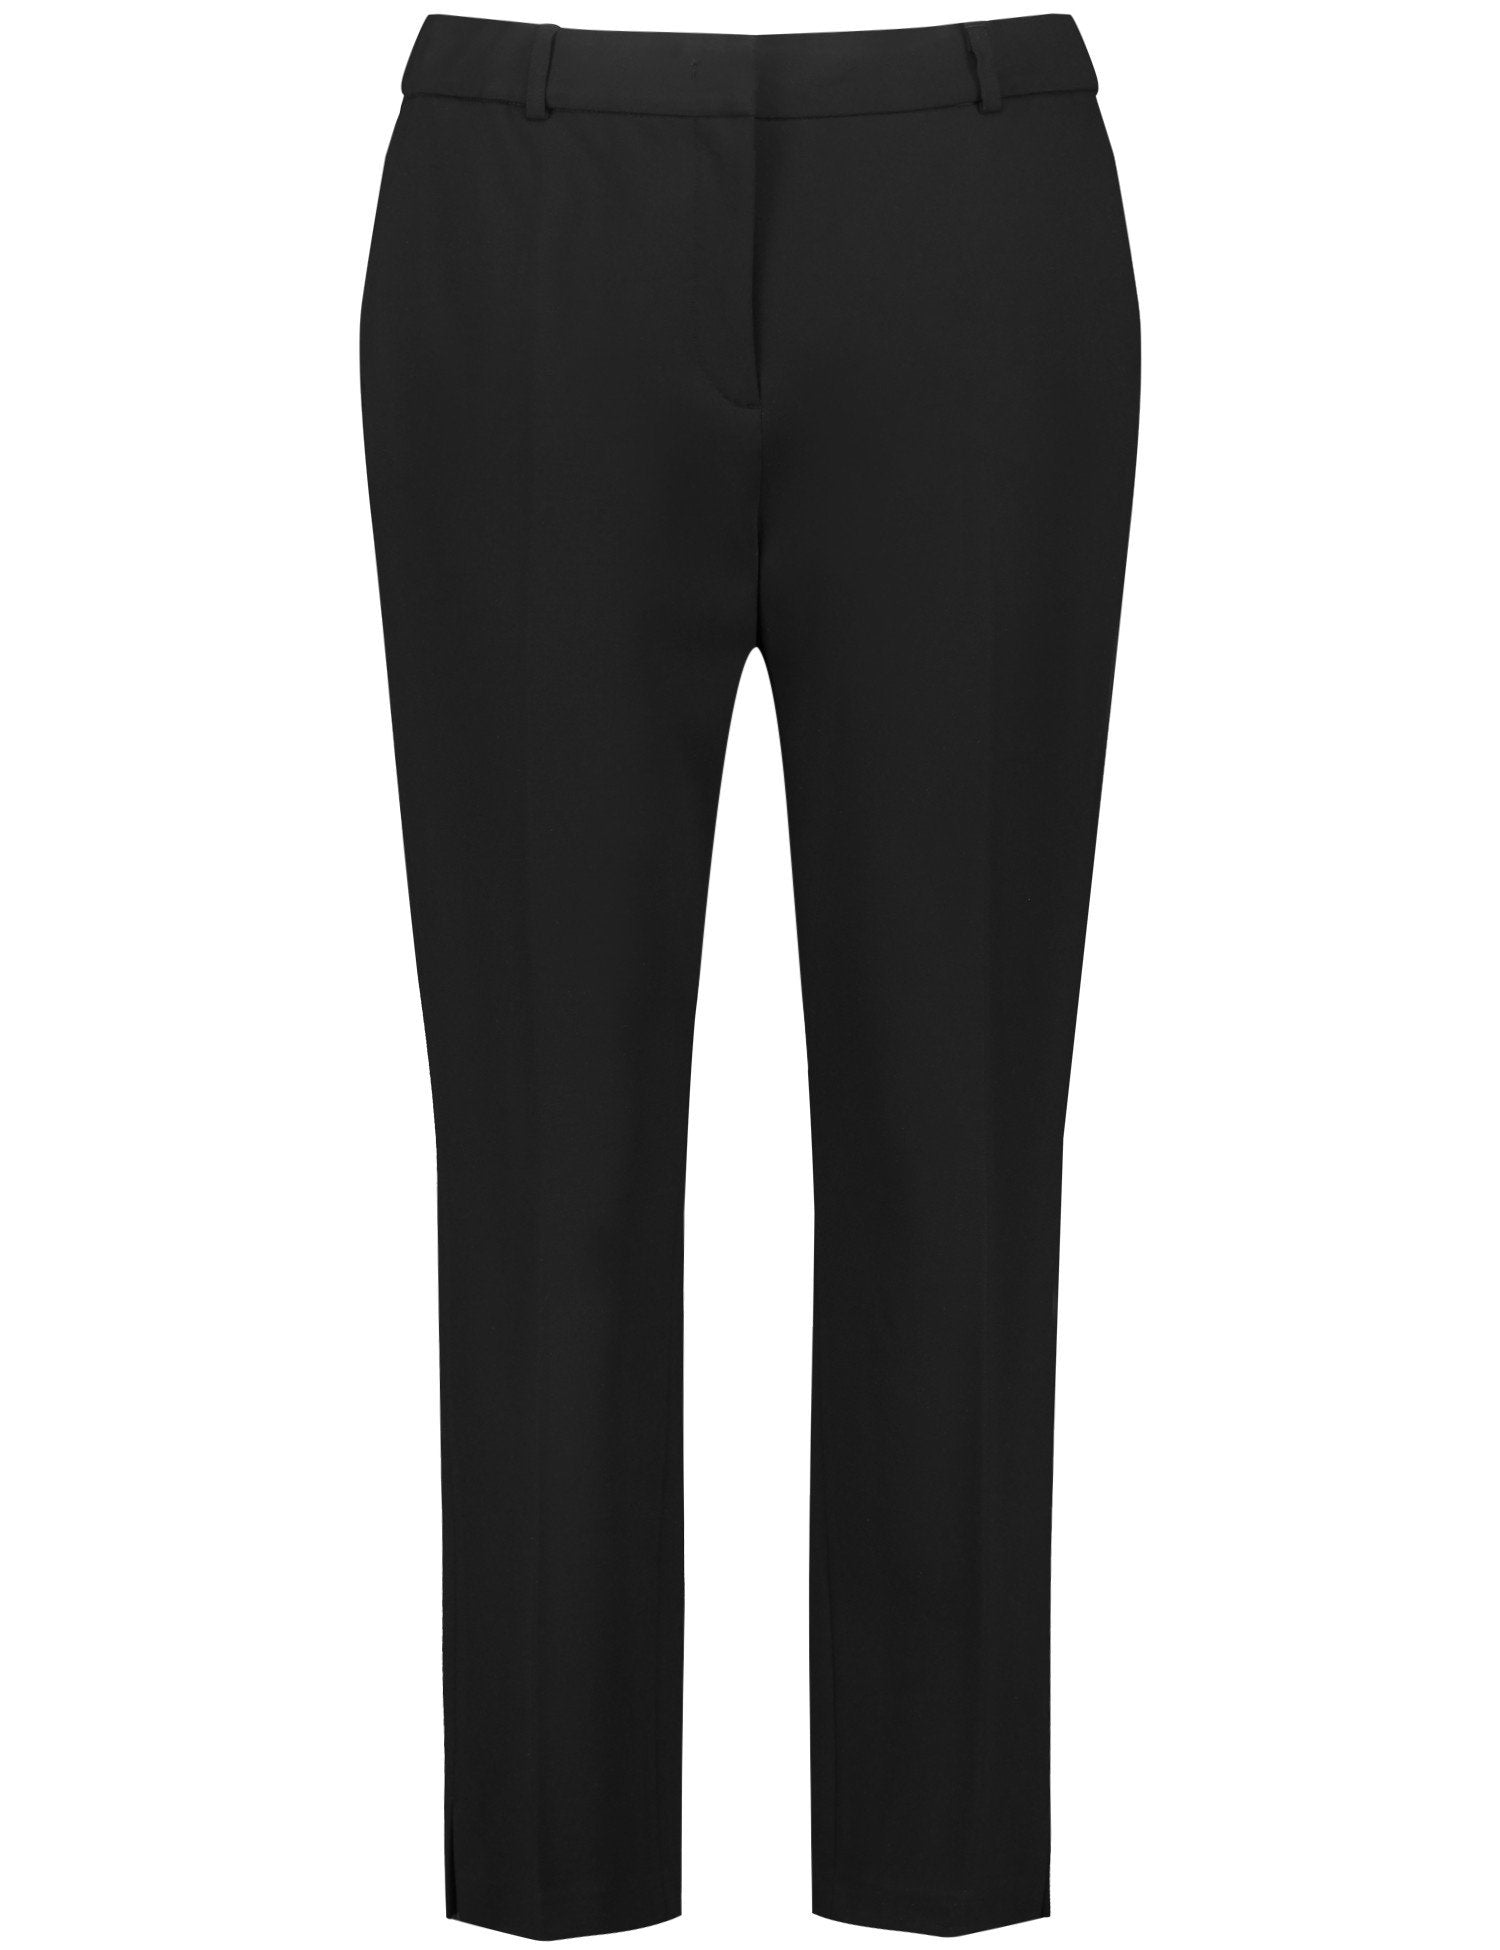 Greta Sophisticated 7/8-Length Trousers_920981-29038_1100_02